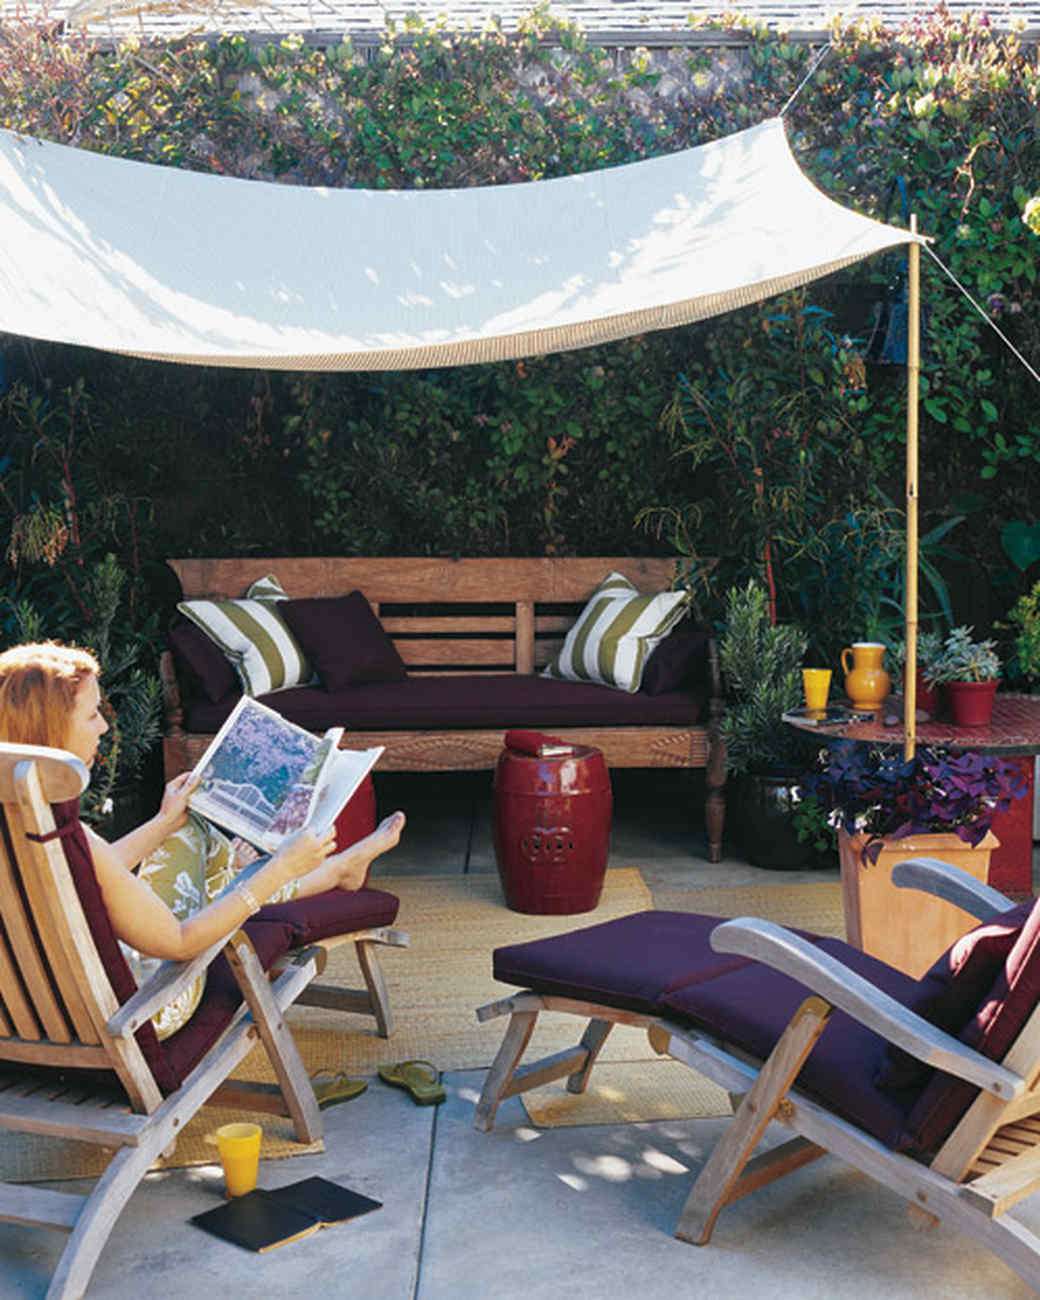 A Slice Of Shade Creating Canopies, How To Build Your Own Patio Canopy